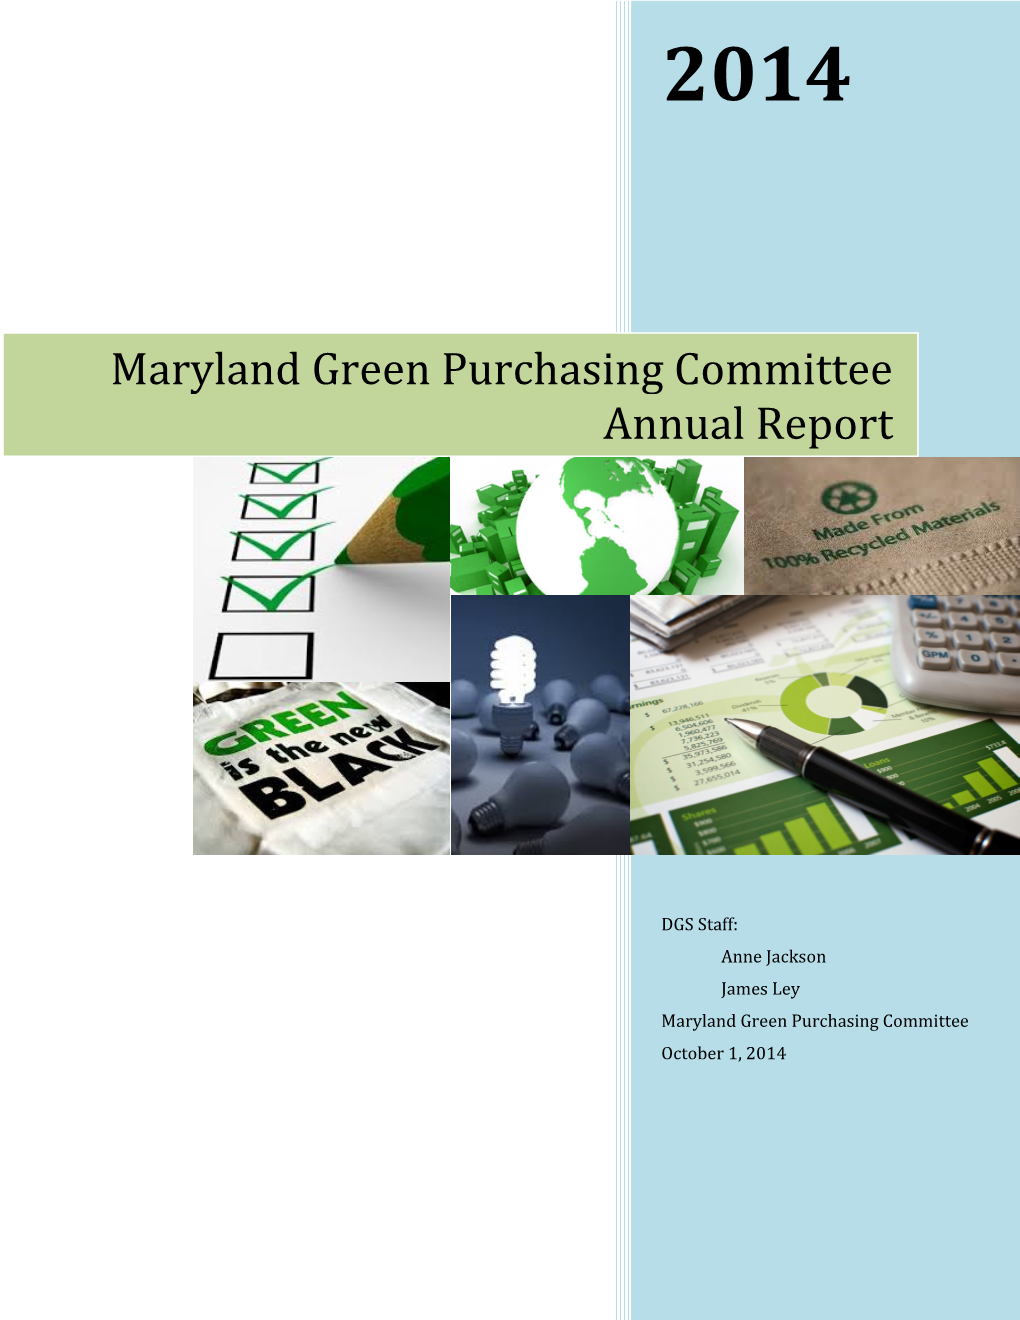 Maryland Green Purchasing Committee Annual Report